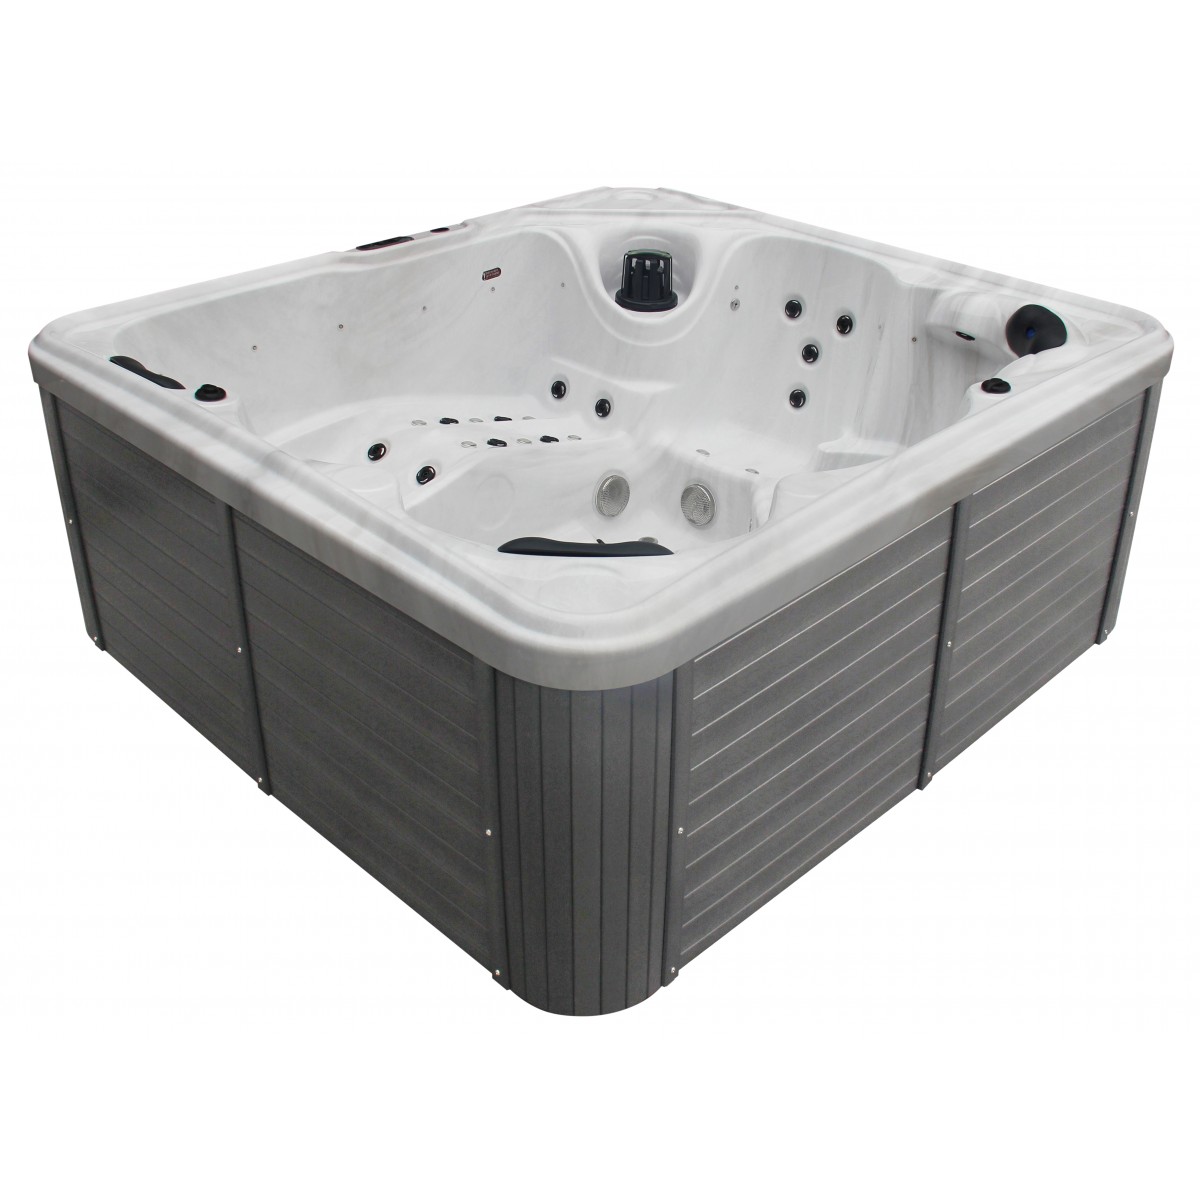 6 Person Hot Tub - Atlantic | Combined Shipping